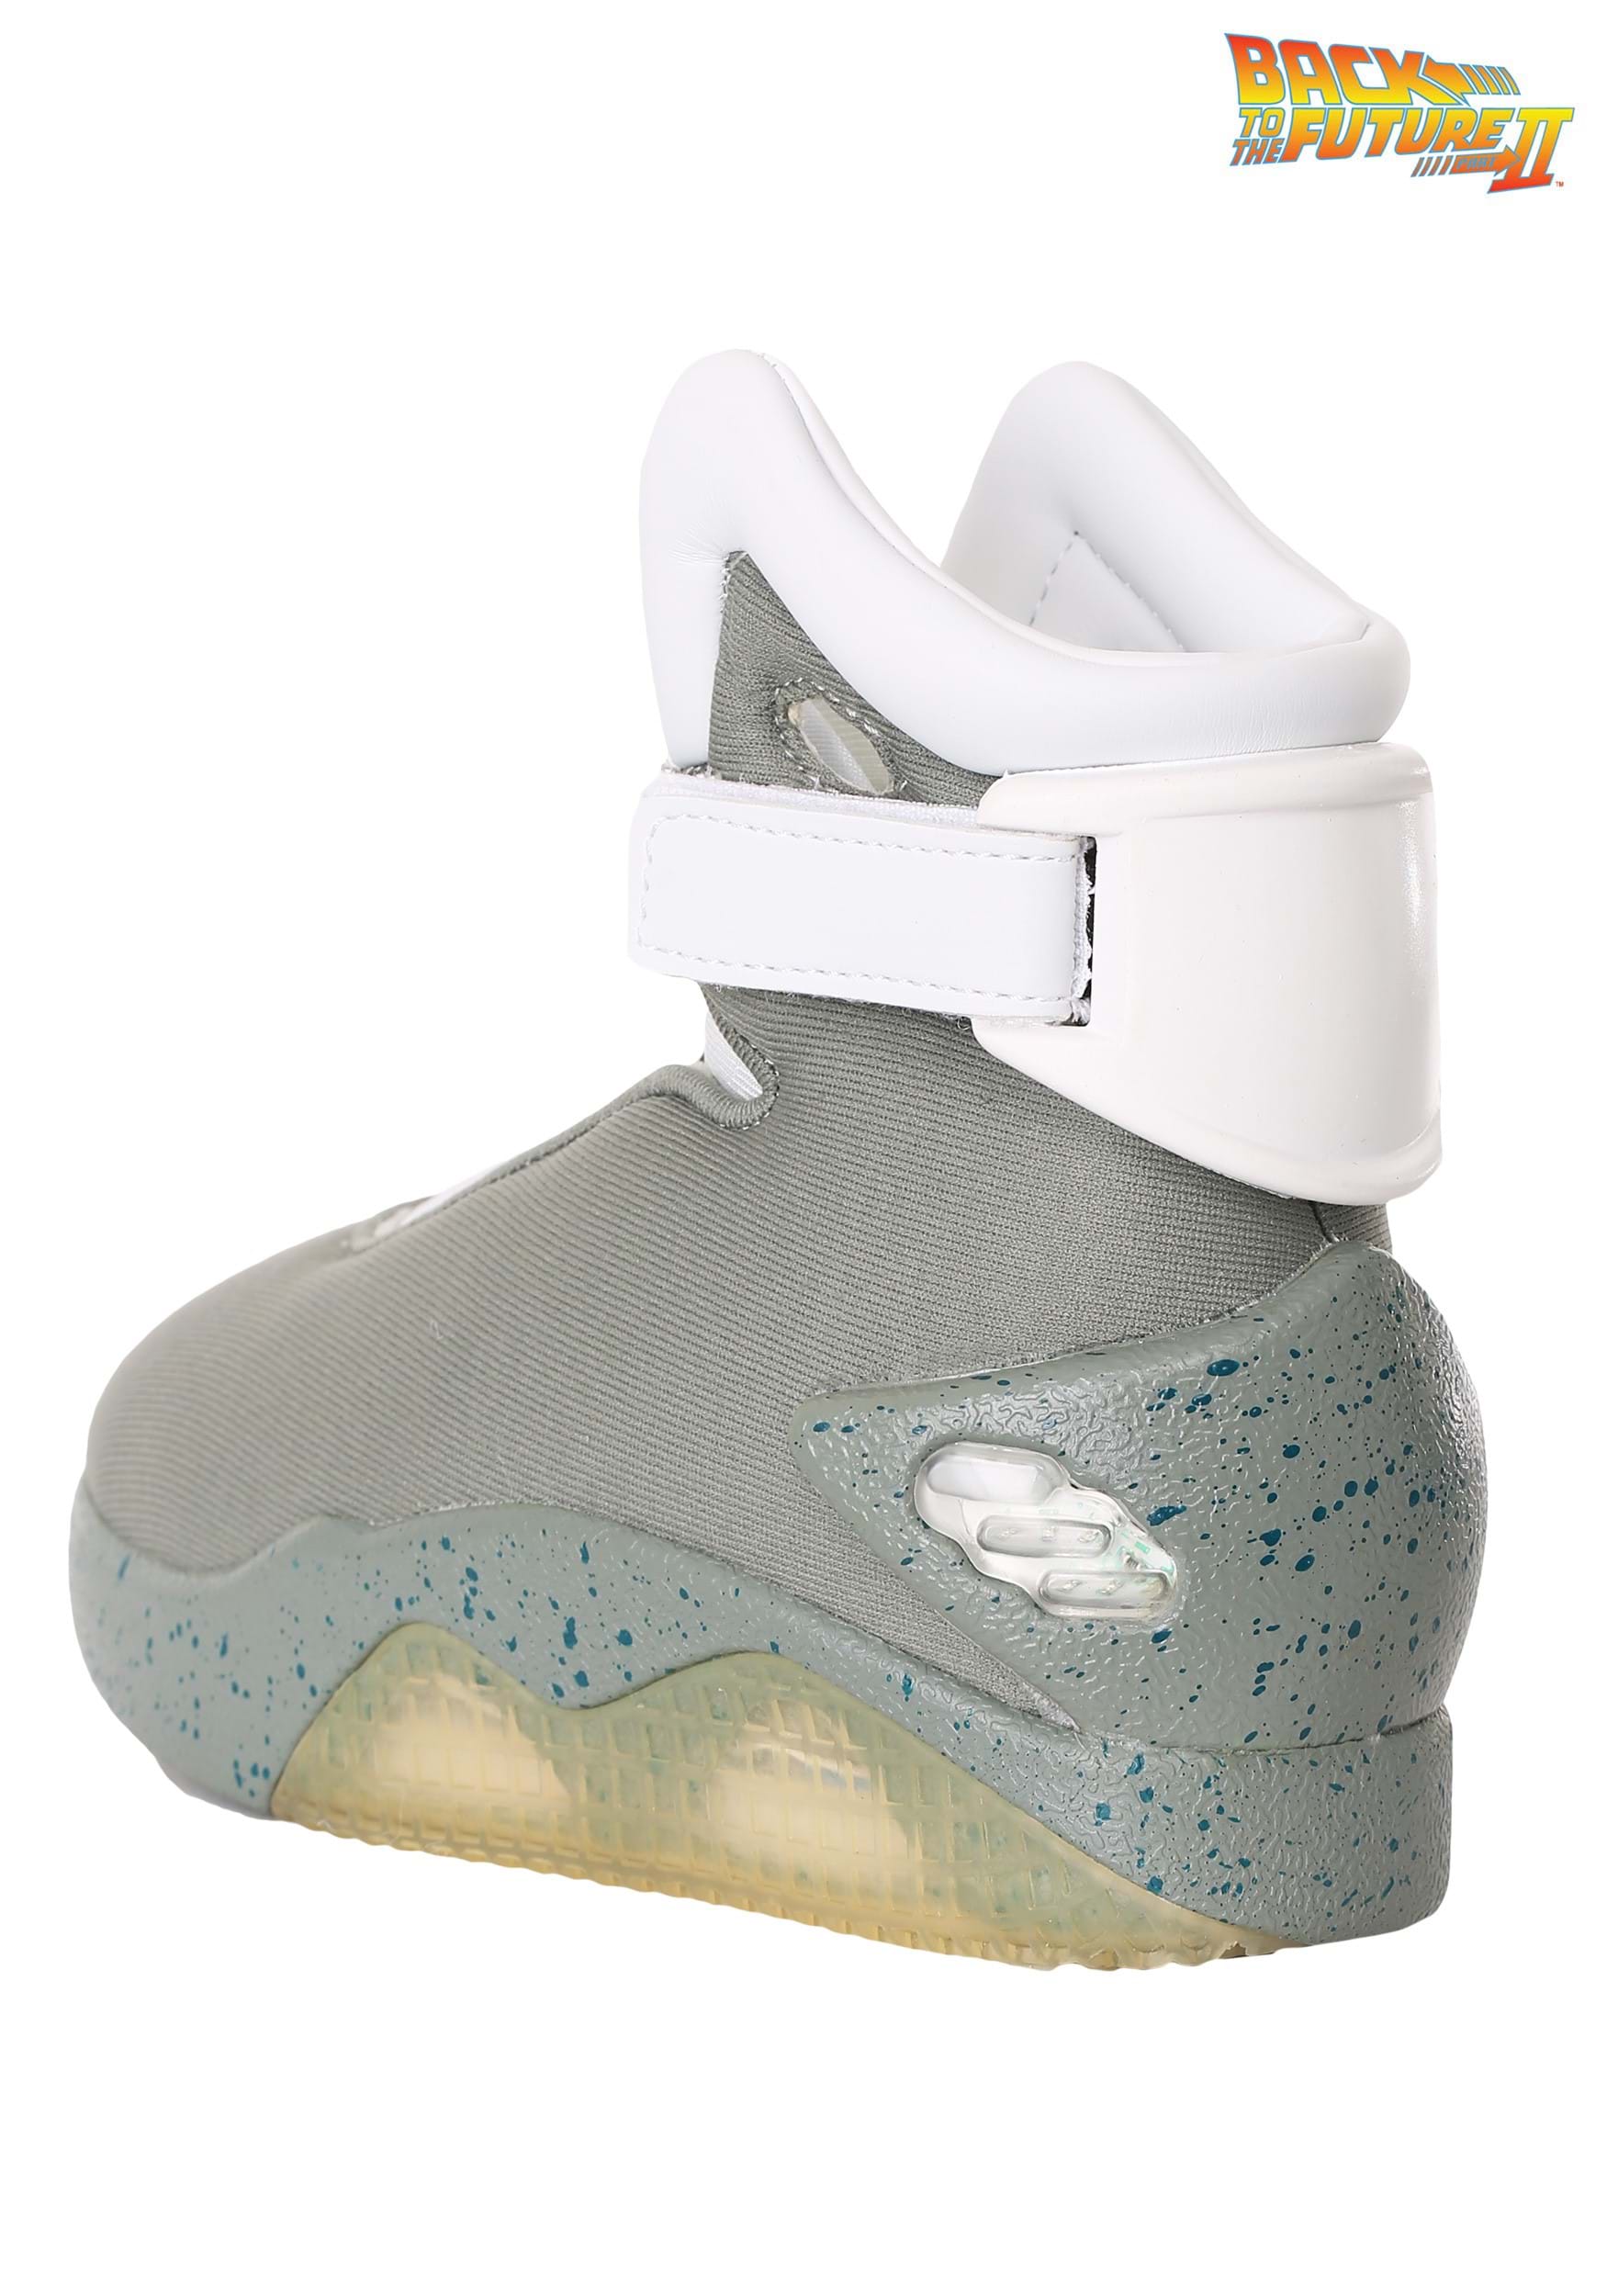 Light Up Back To The Future Kid's Shoes